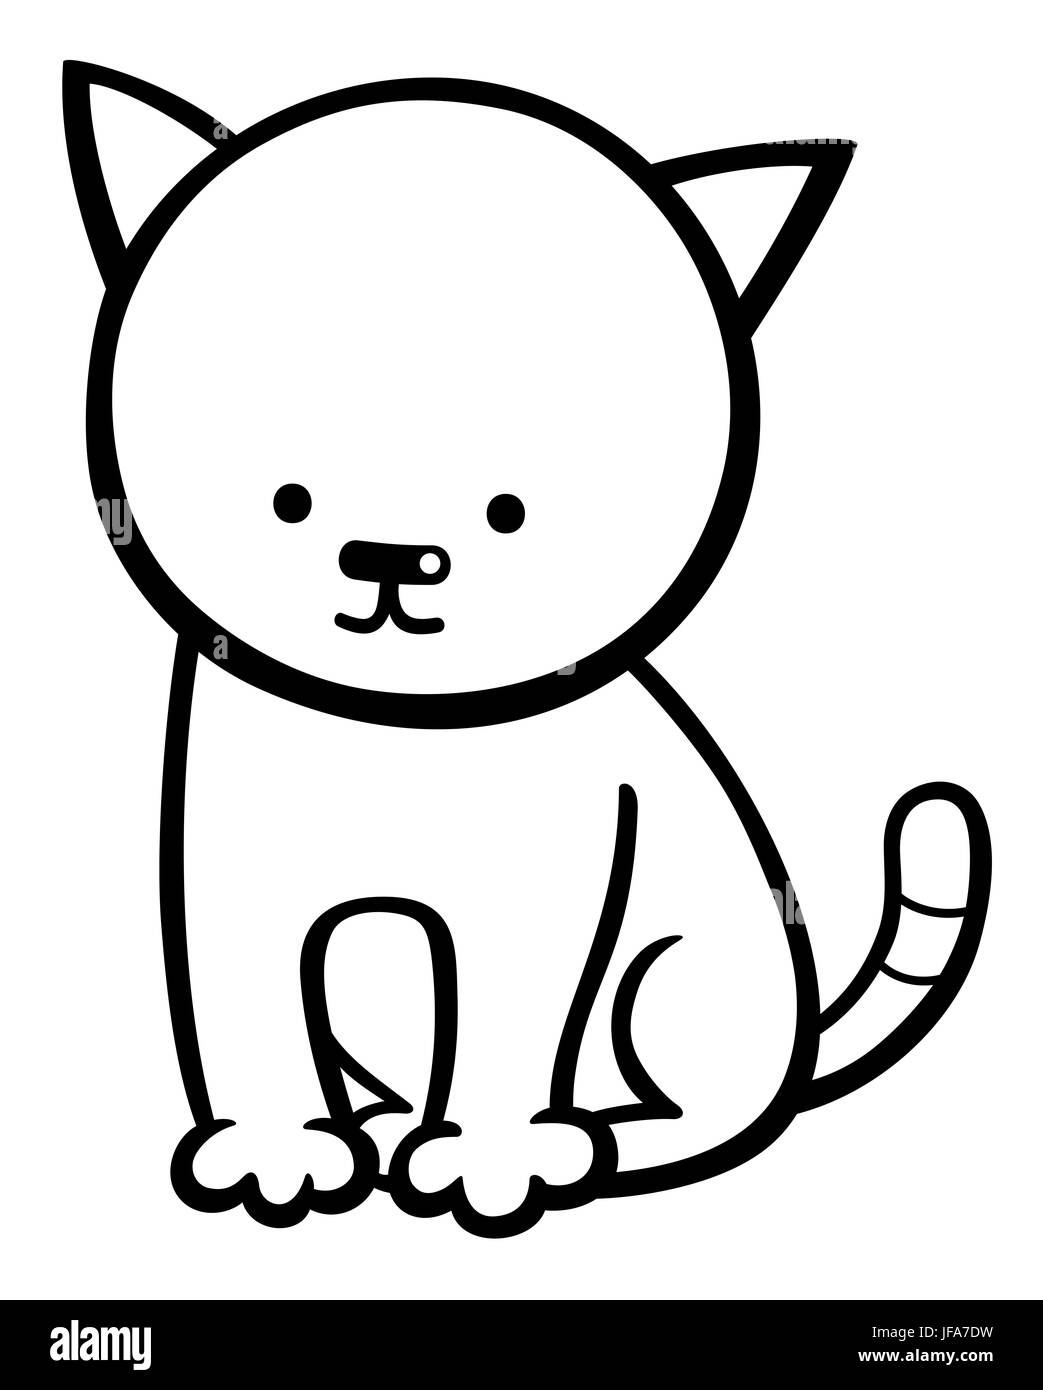 kitten character coloring page Stock Photo